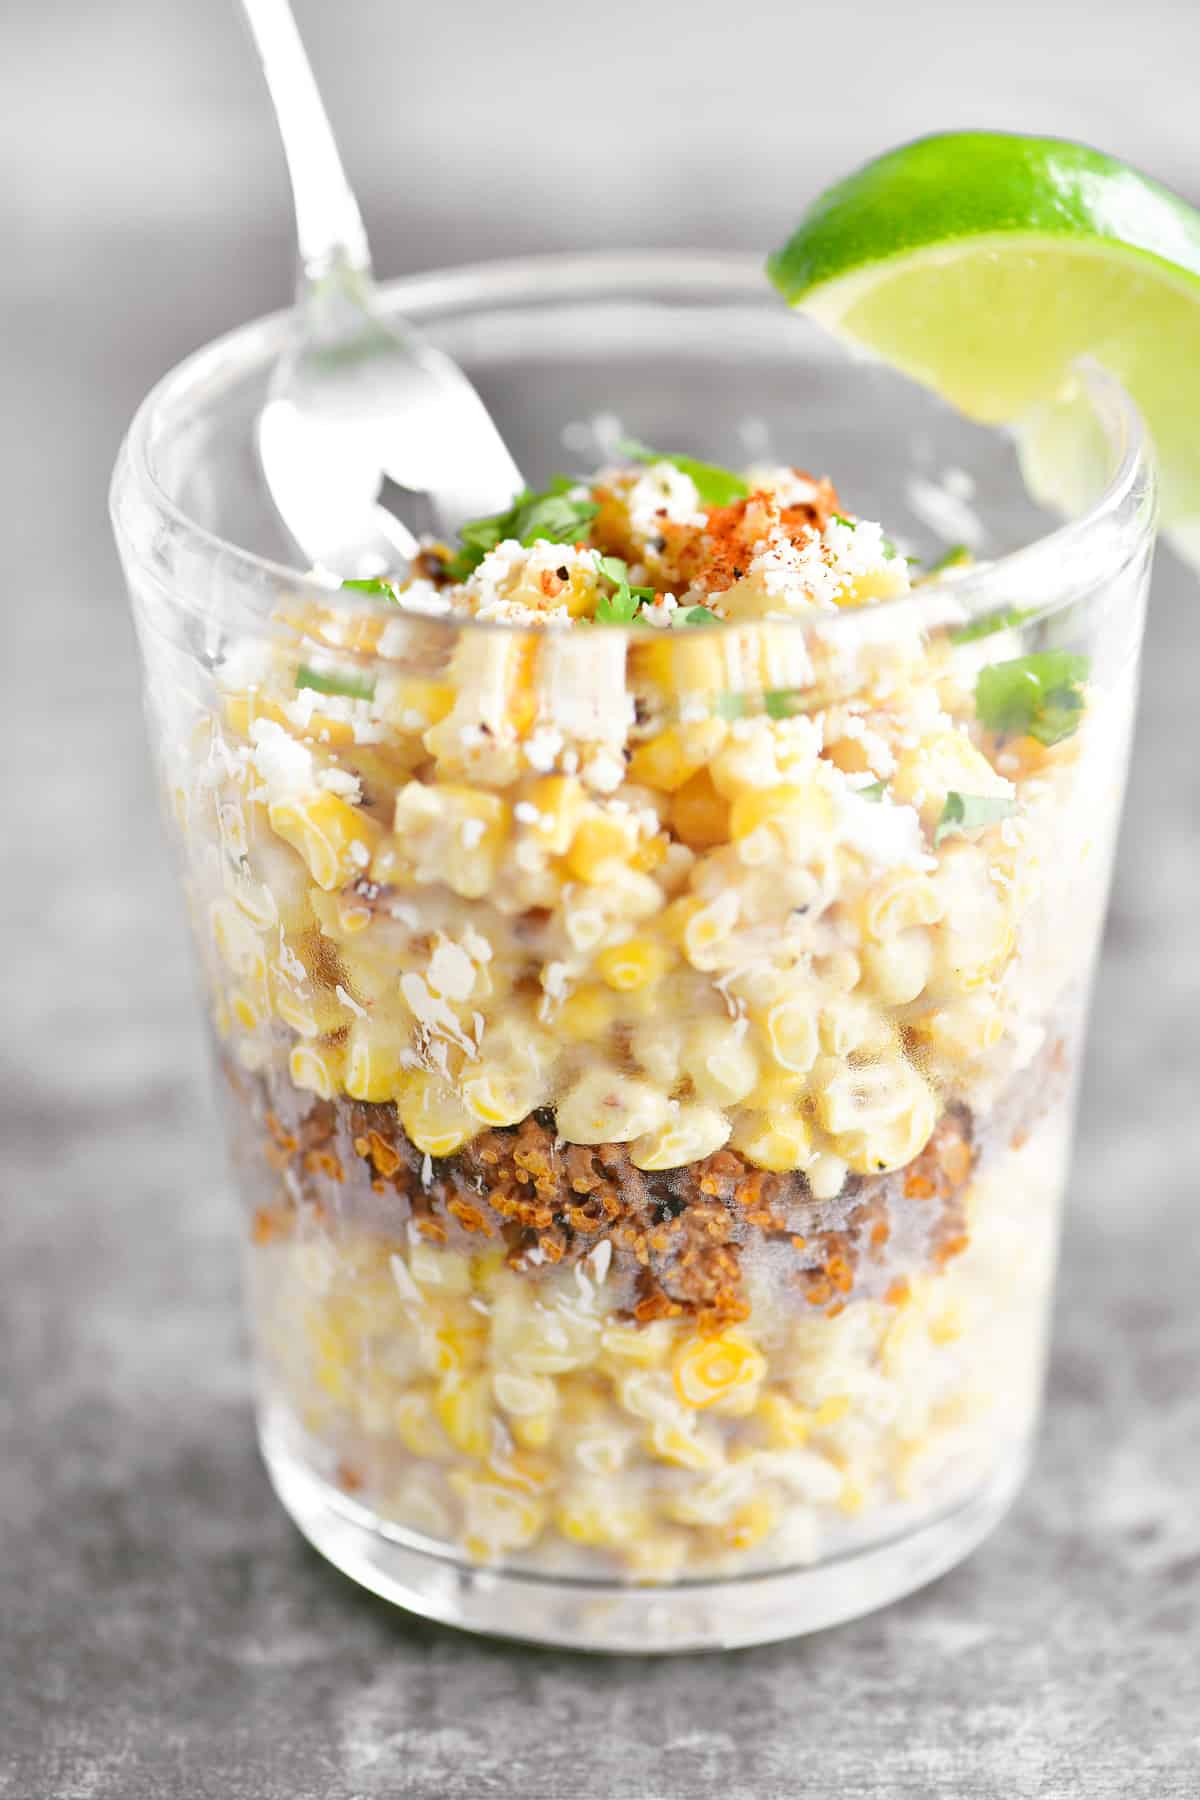 Mexican corn in a cup with a fork.